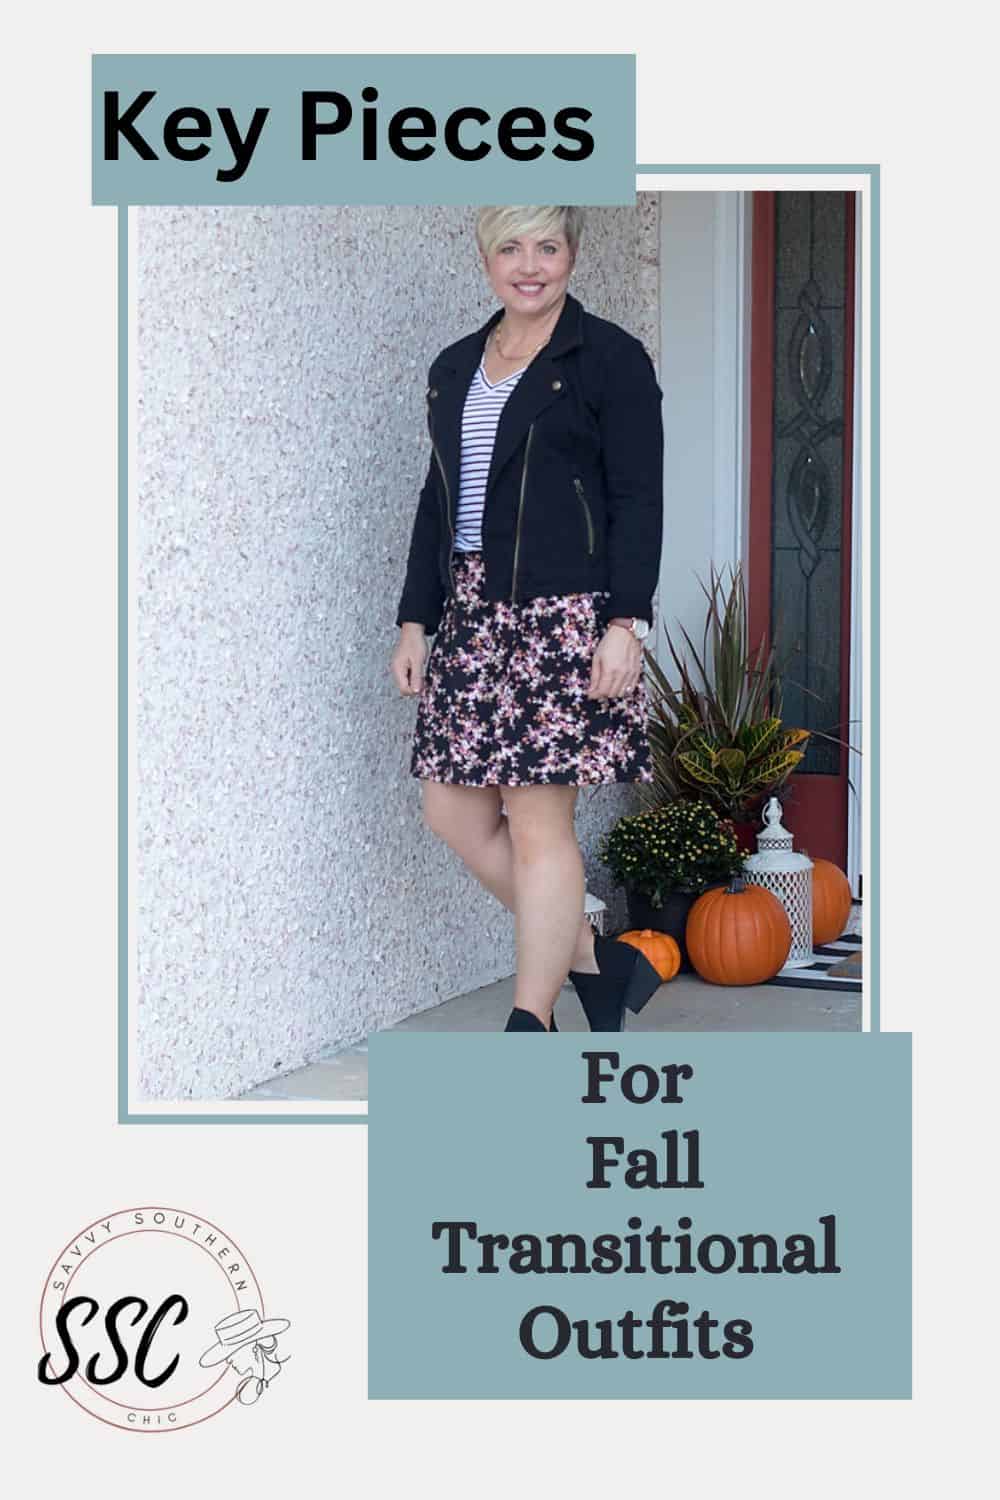 Key Pieces for Fall Transitional Outfits